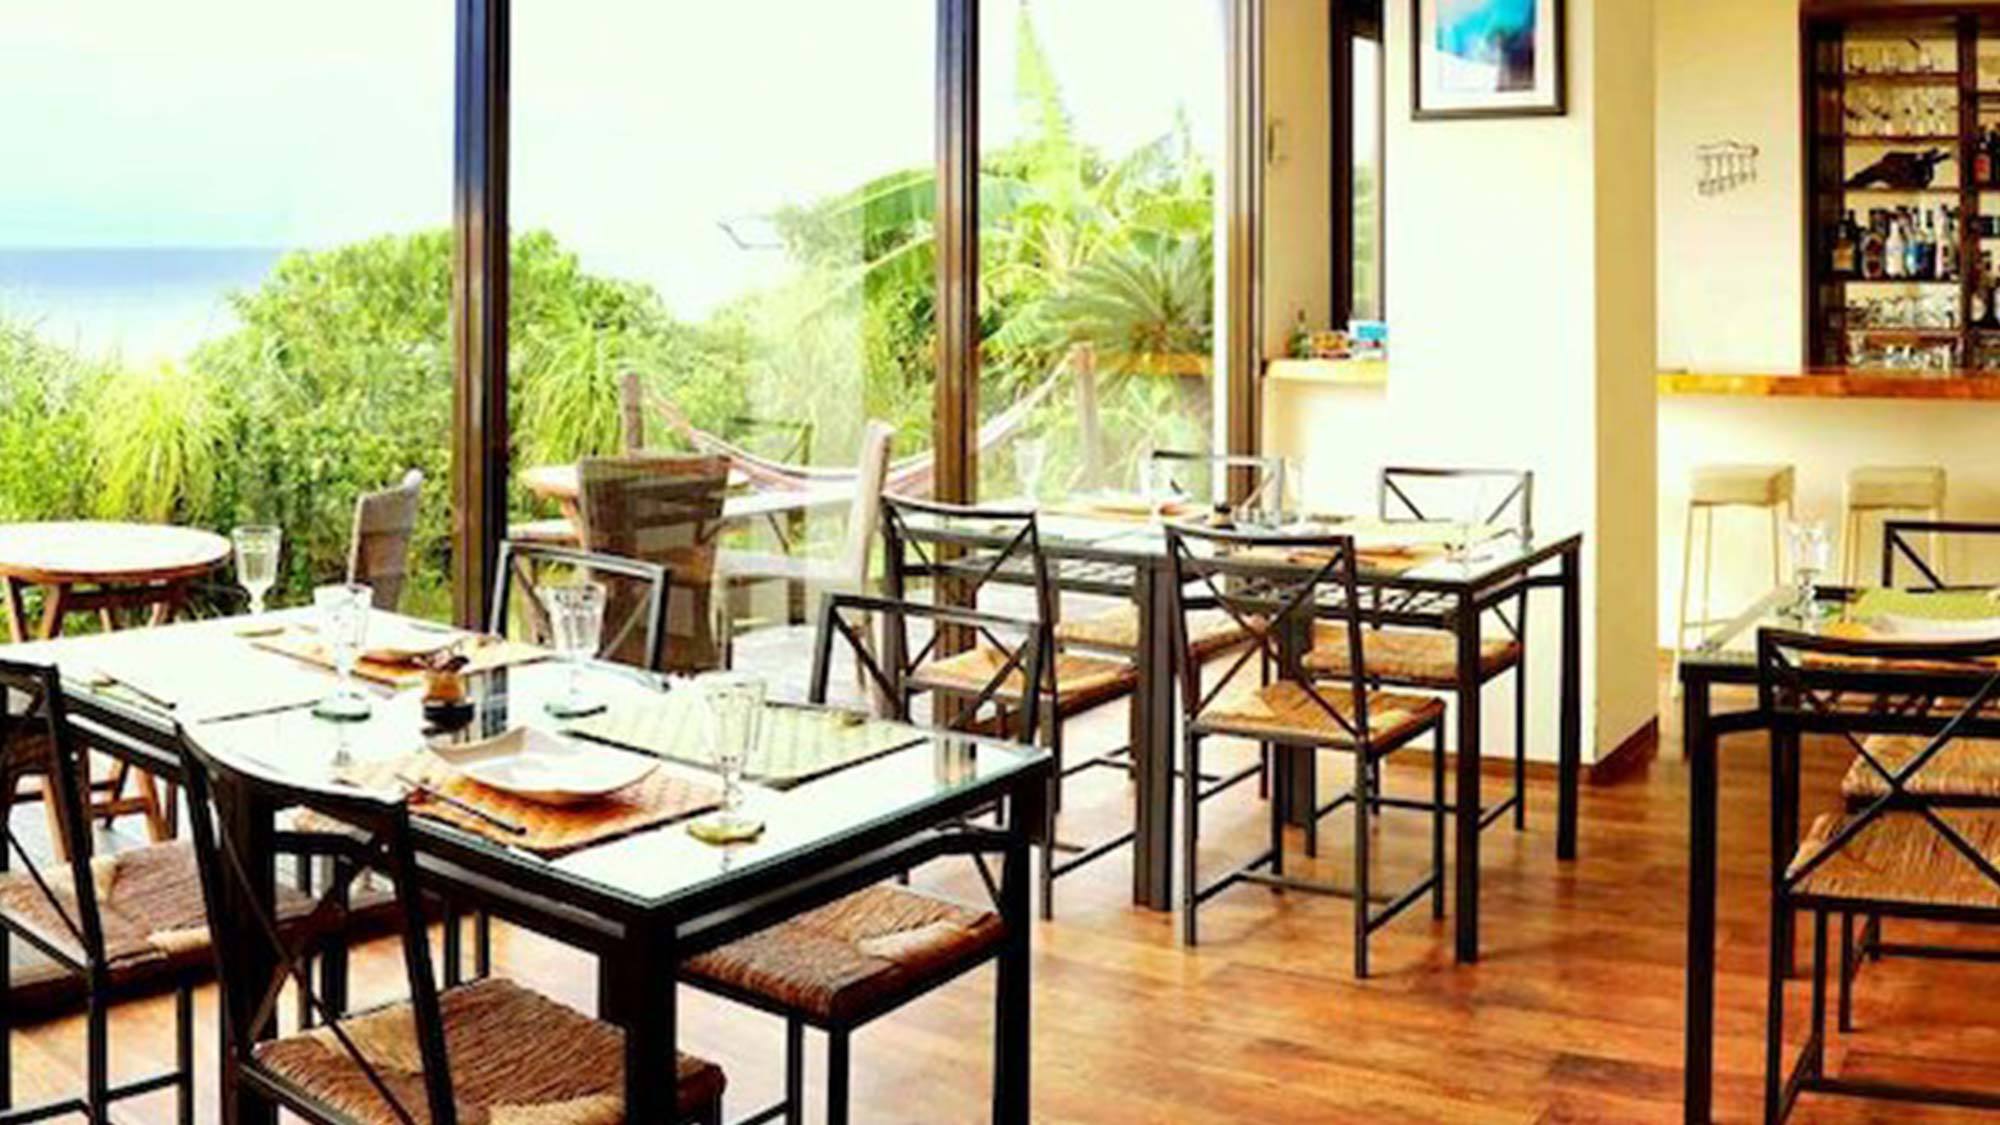 Kaya Resort Kourijima Kaya Resort Kourijima is a popular choice amongst travelers in Okinawa Main island, whether exploring or just passing through. The property has everything you need for a comfortable stay. Service-mind